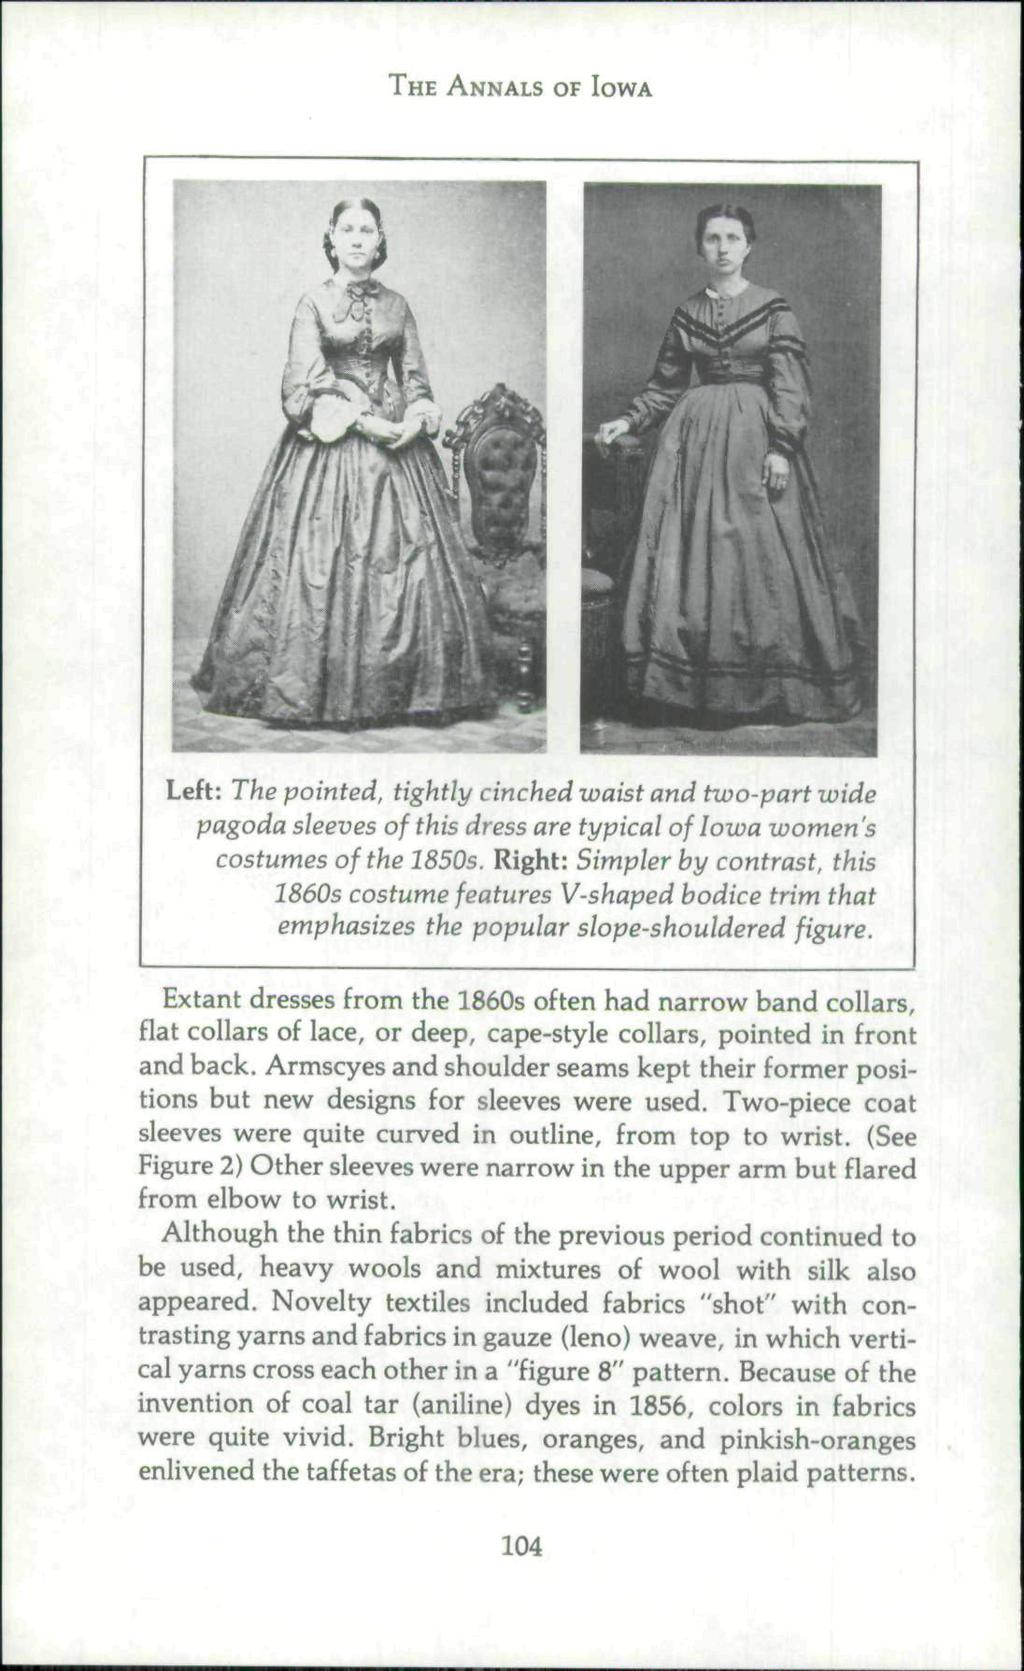 THE ANNALS OF IOWA Left: The pointed, tightly cinched waist and two-part wide pagoda sleeves of this dress are typical of Iowa women's costumes of the 1850s.